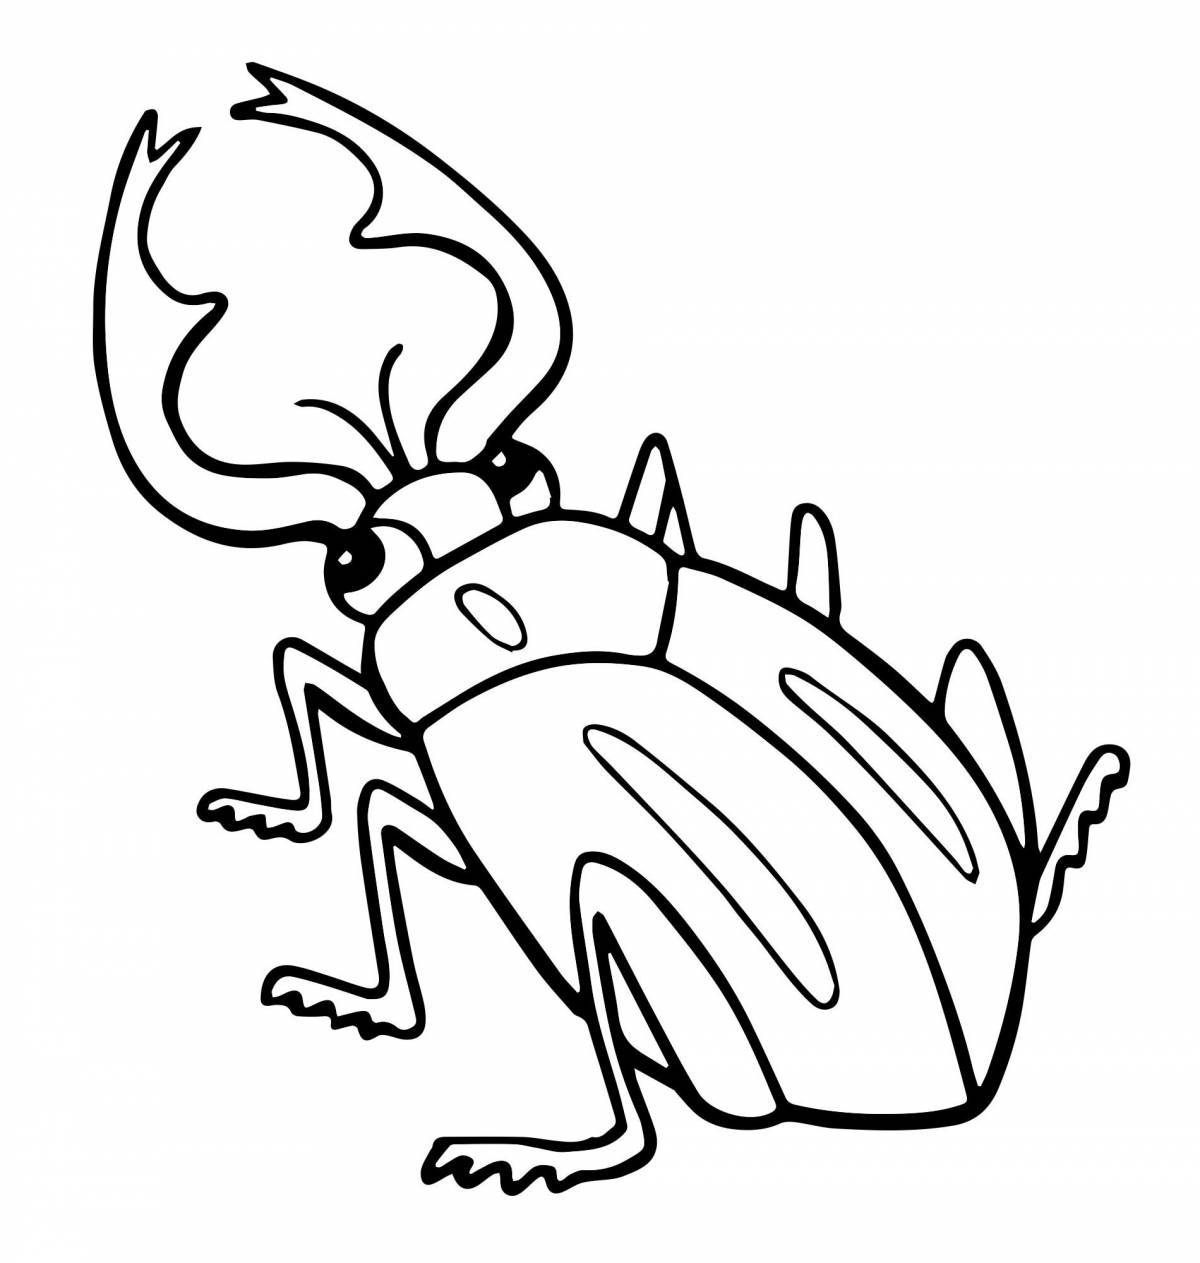 Bright beetle coloring book for kids